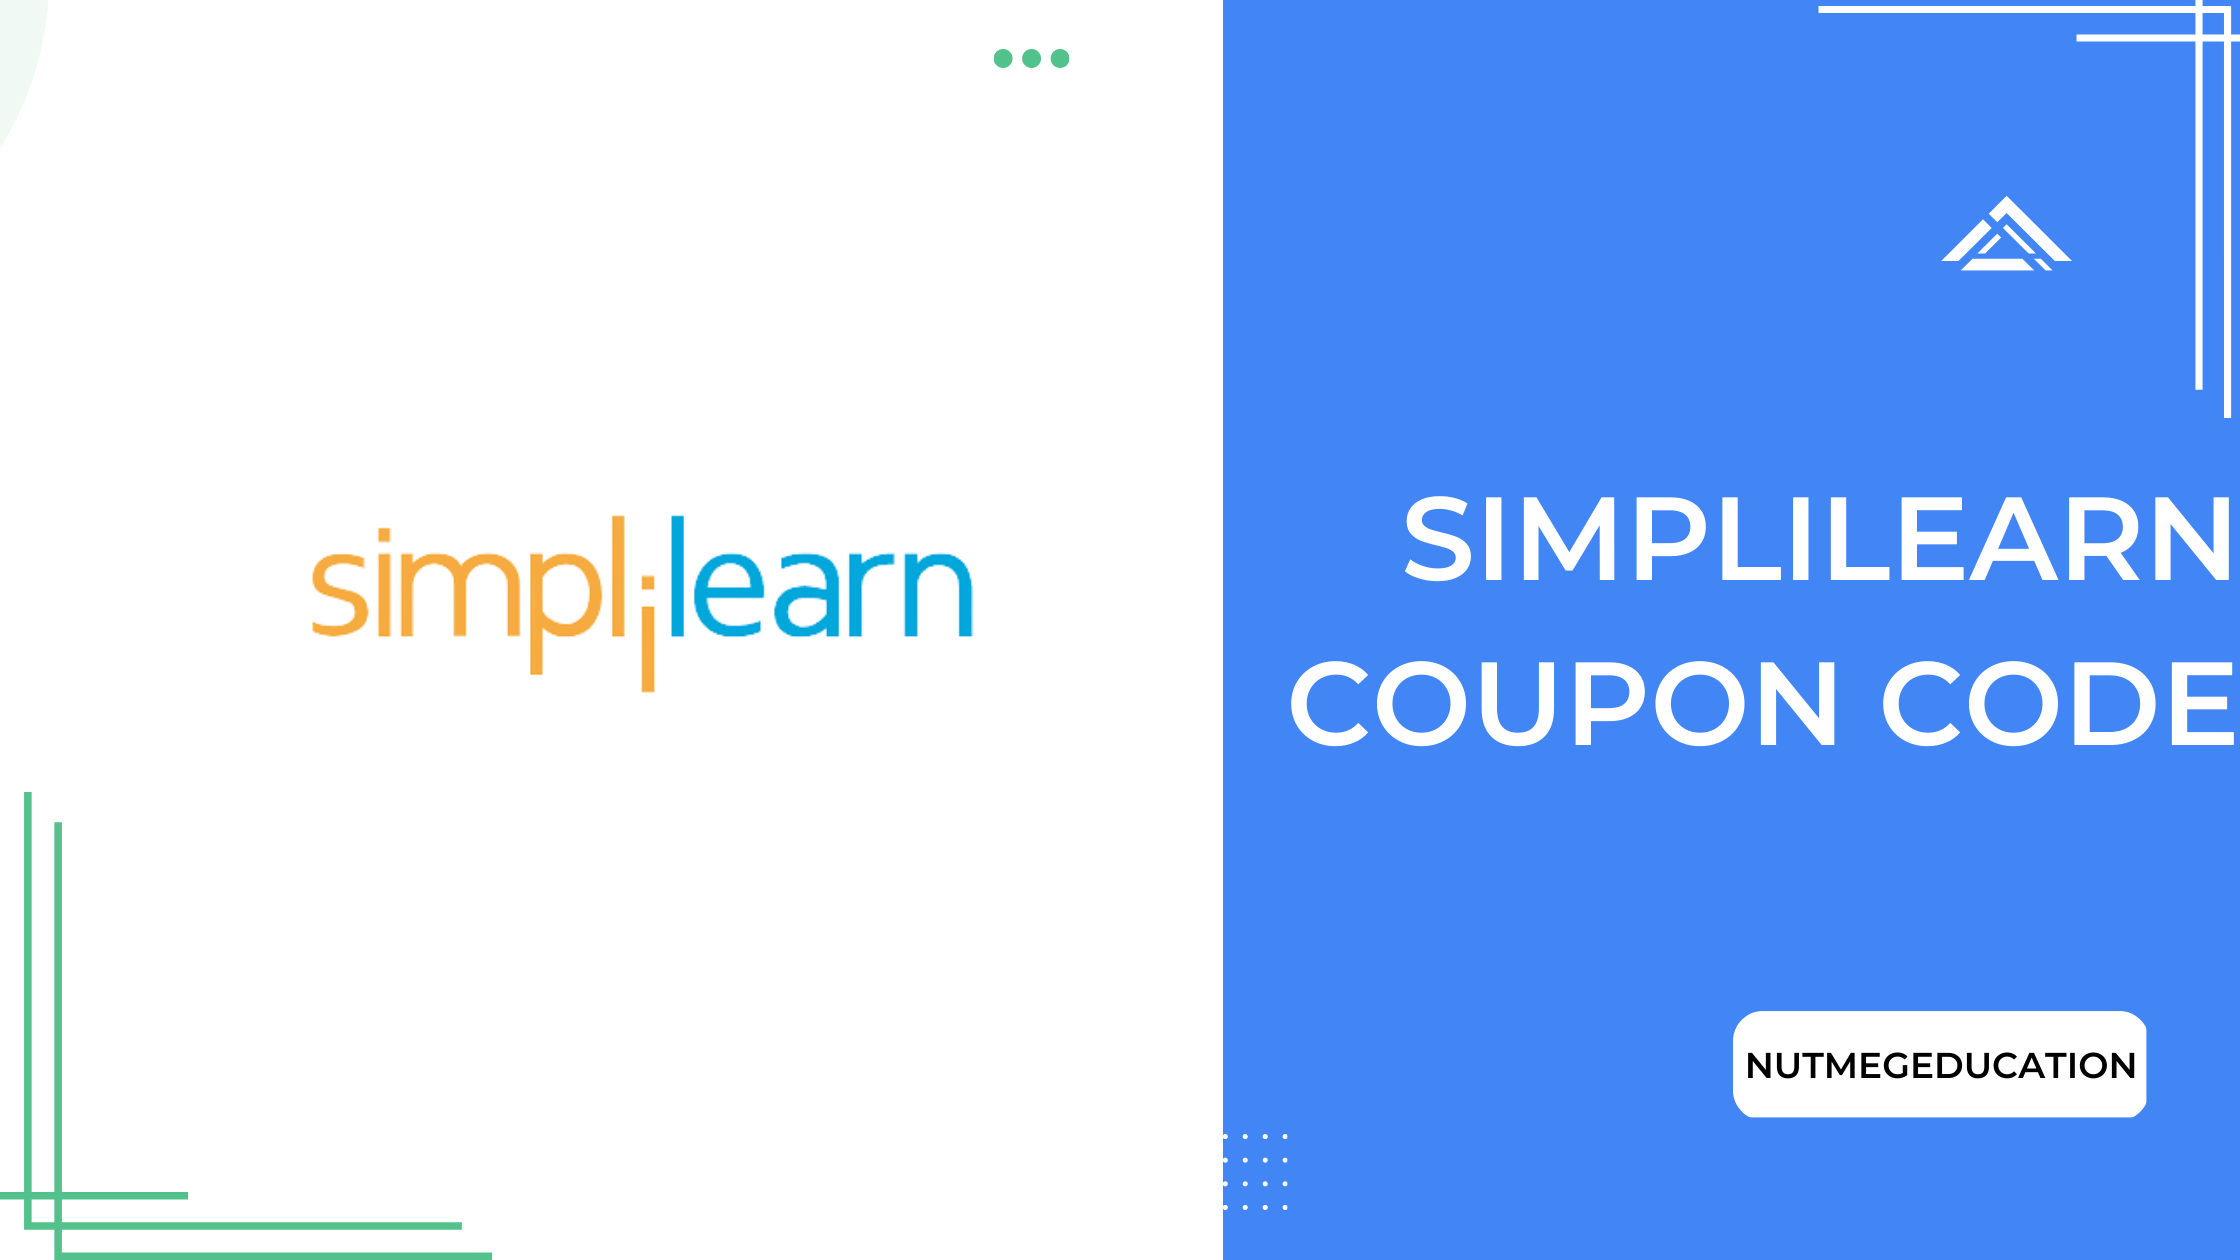 Simplilearn Coupon Code - NutMegEducation